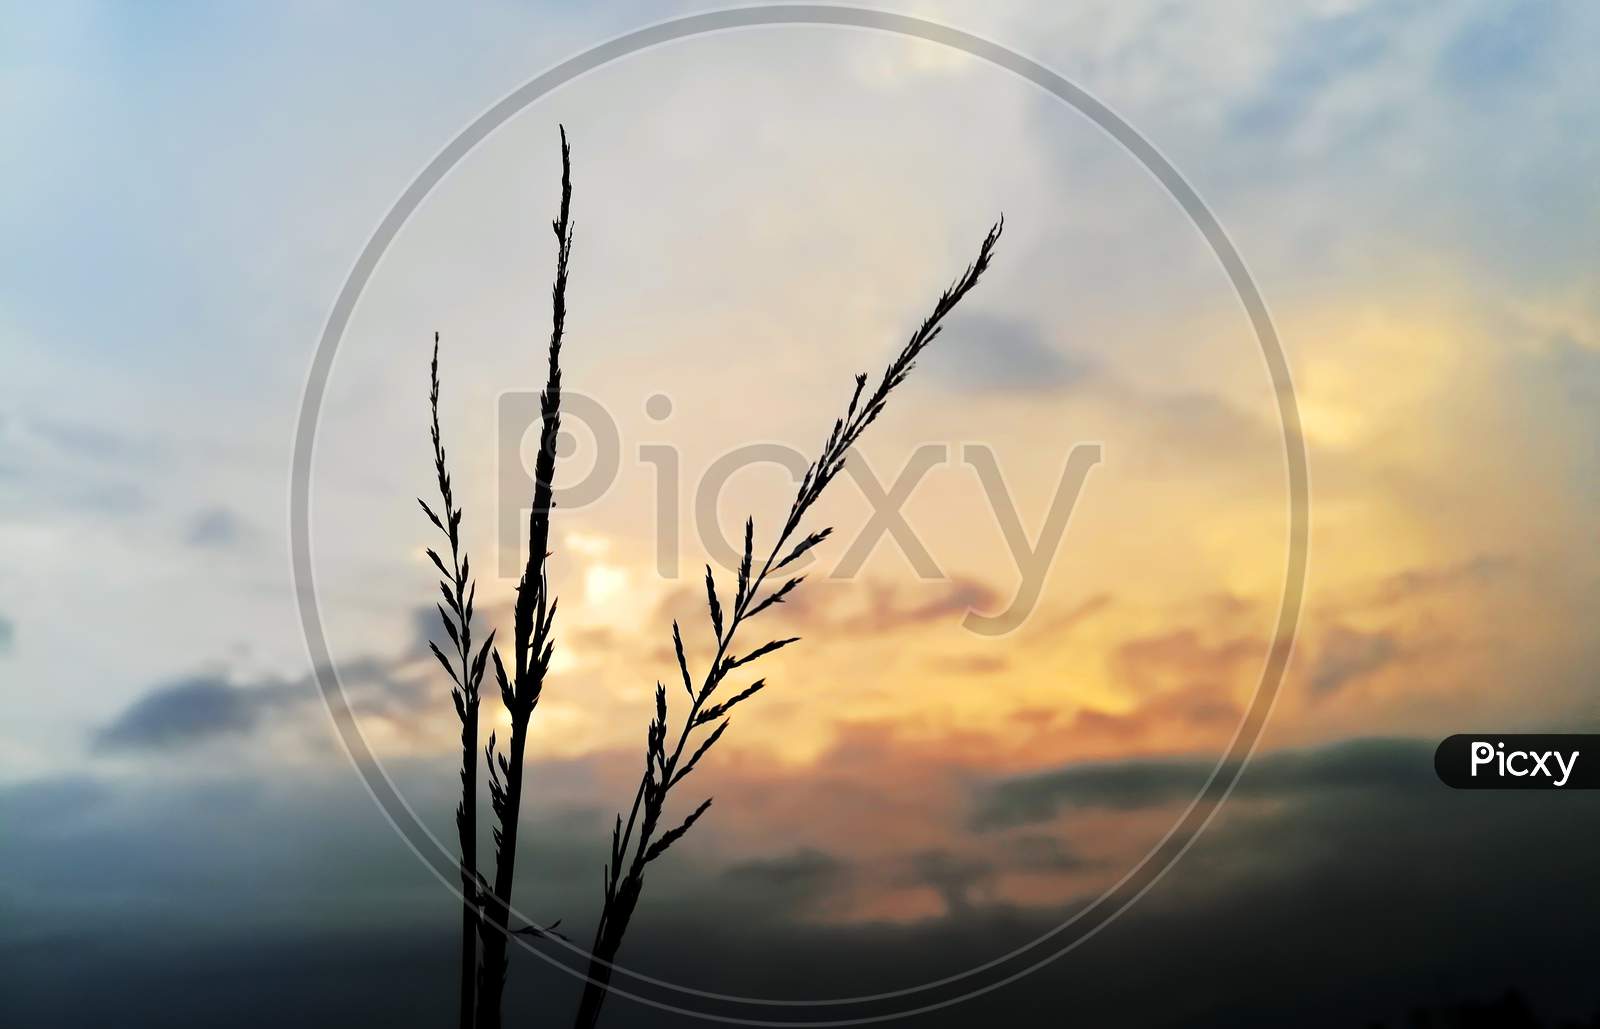 The Rice Plant,Paddy leaves against the Beautiful sky,sunset in the field,